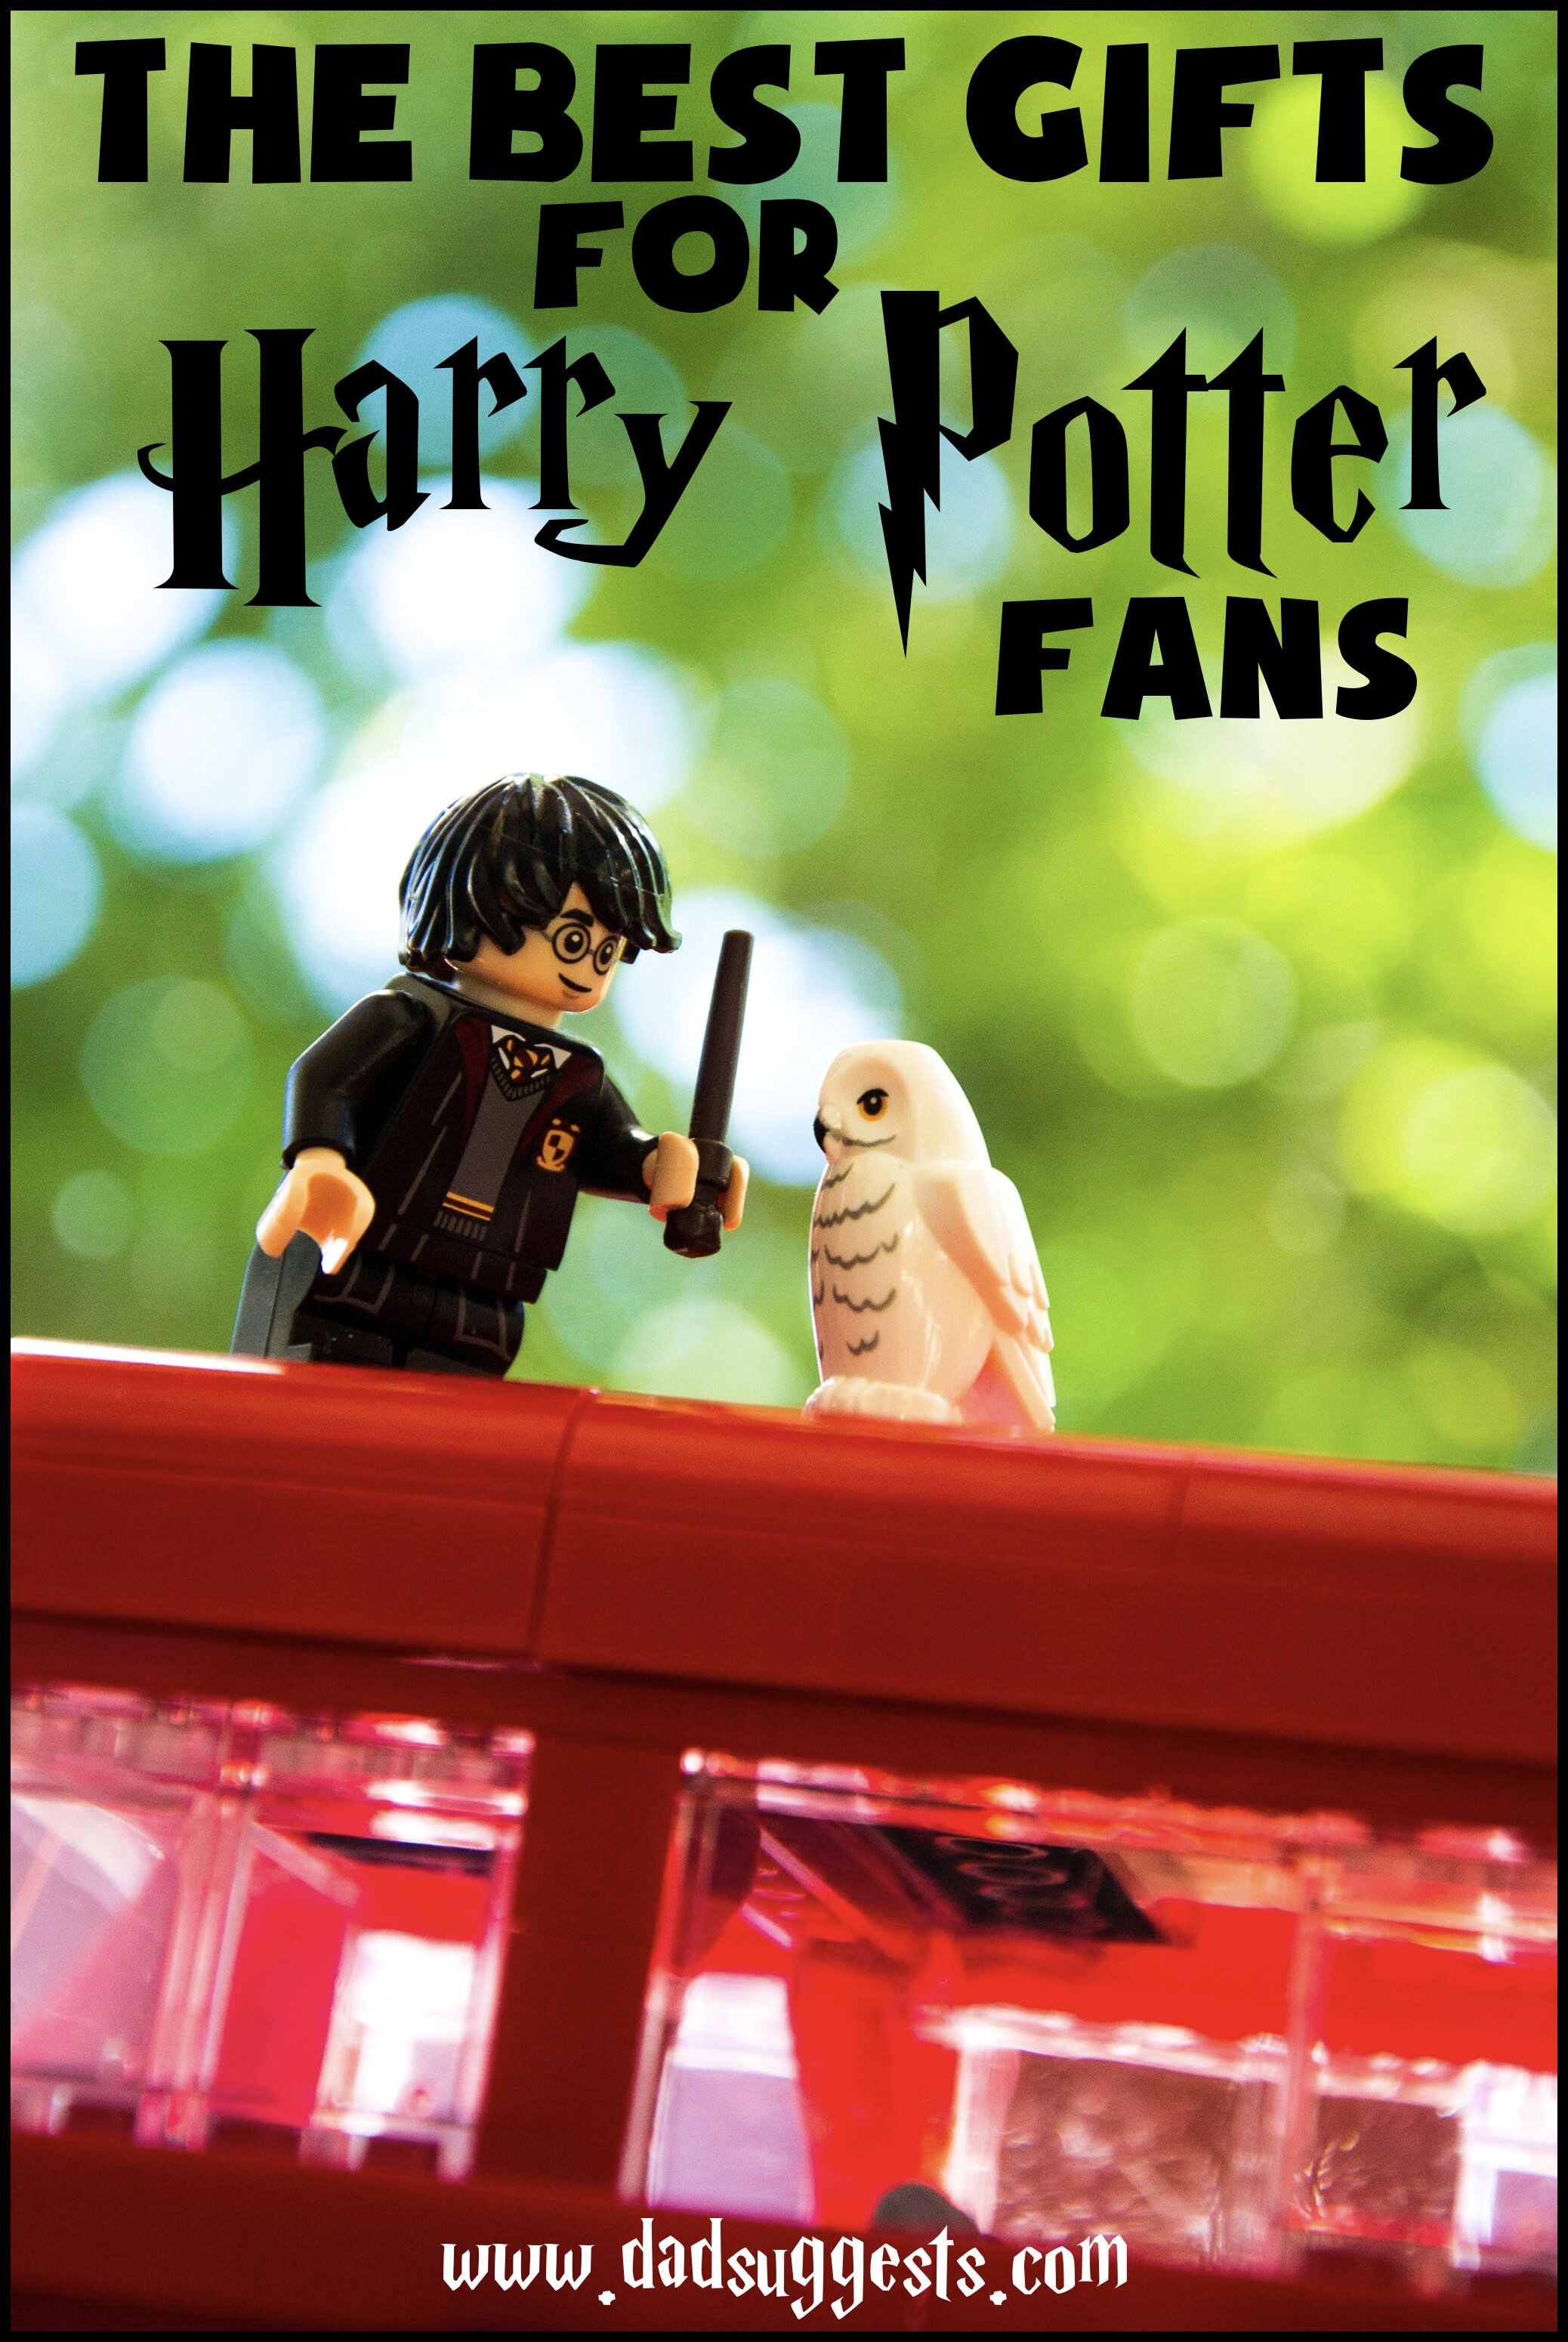 The Gifts for Harry Potter Fans |